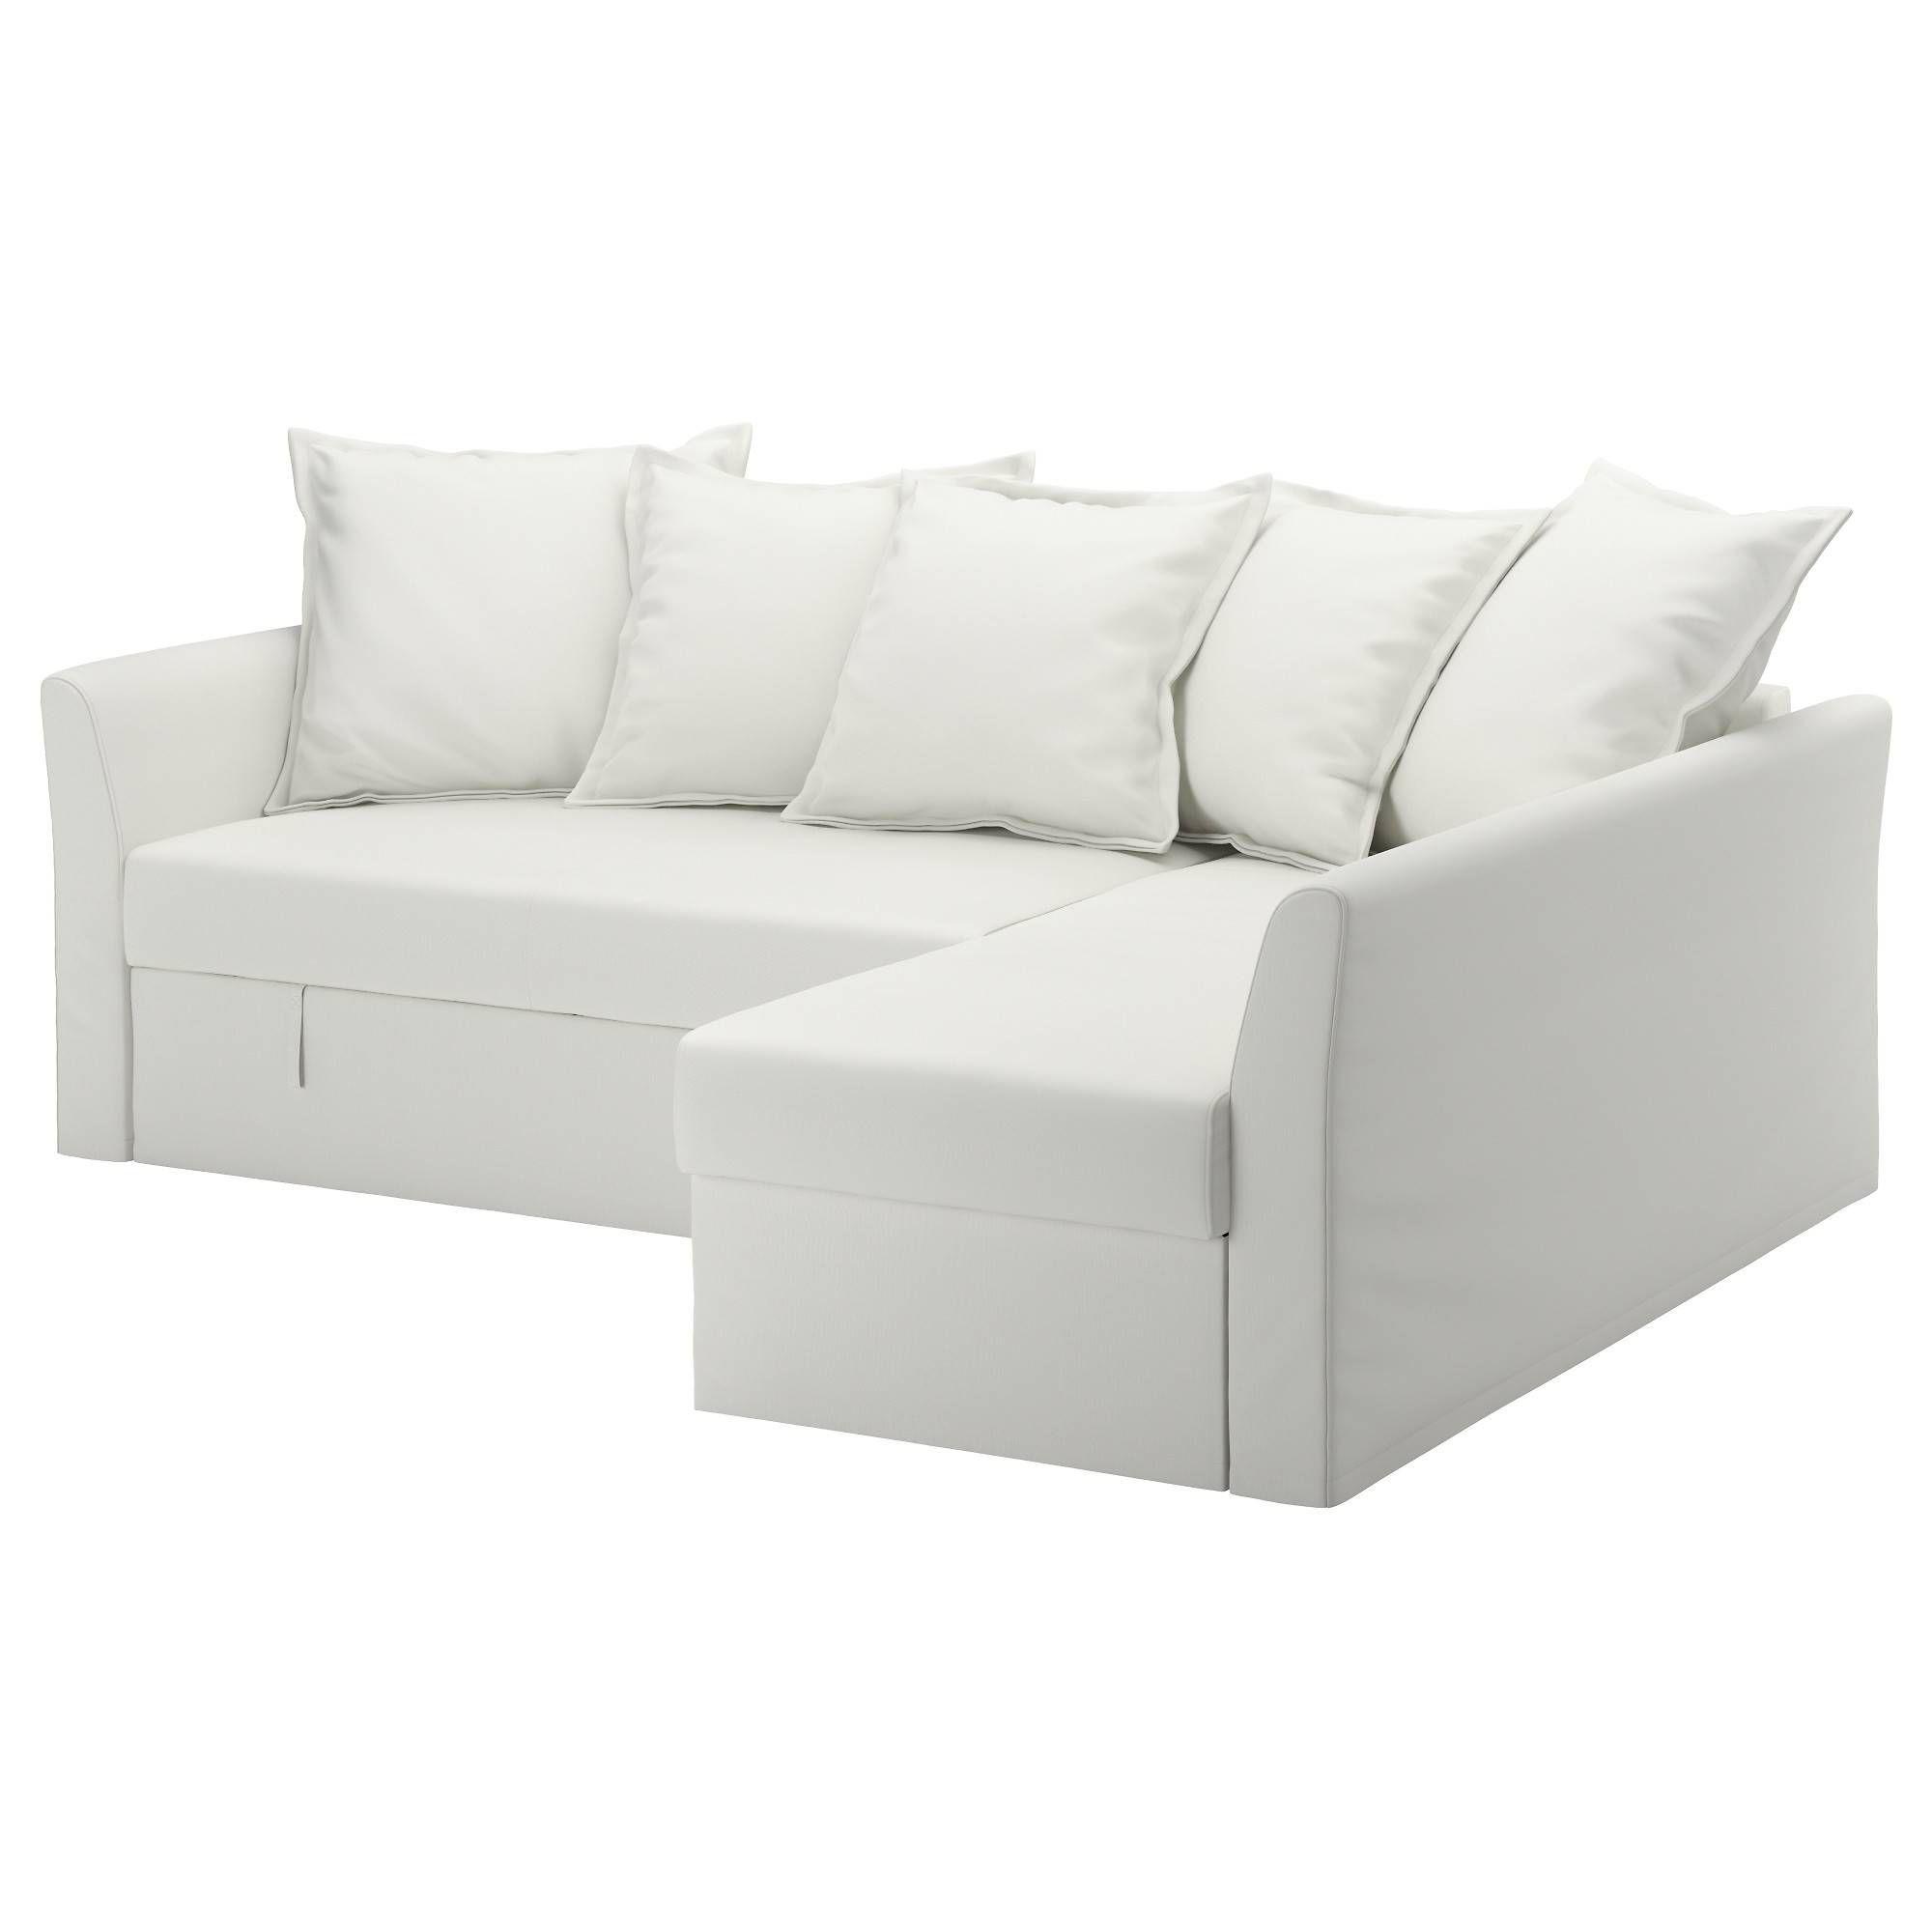 Sofa Beds & Futons – Ikea Intended For Mini Sofa Beds (View 8 of 30)